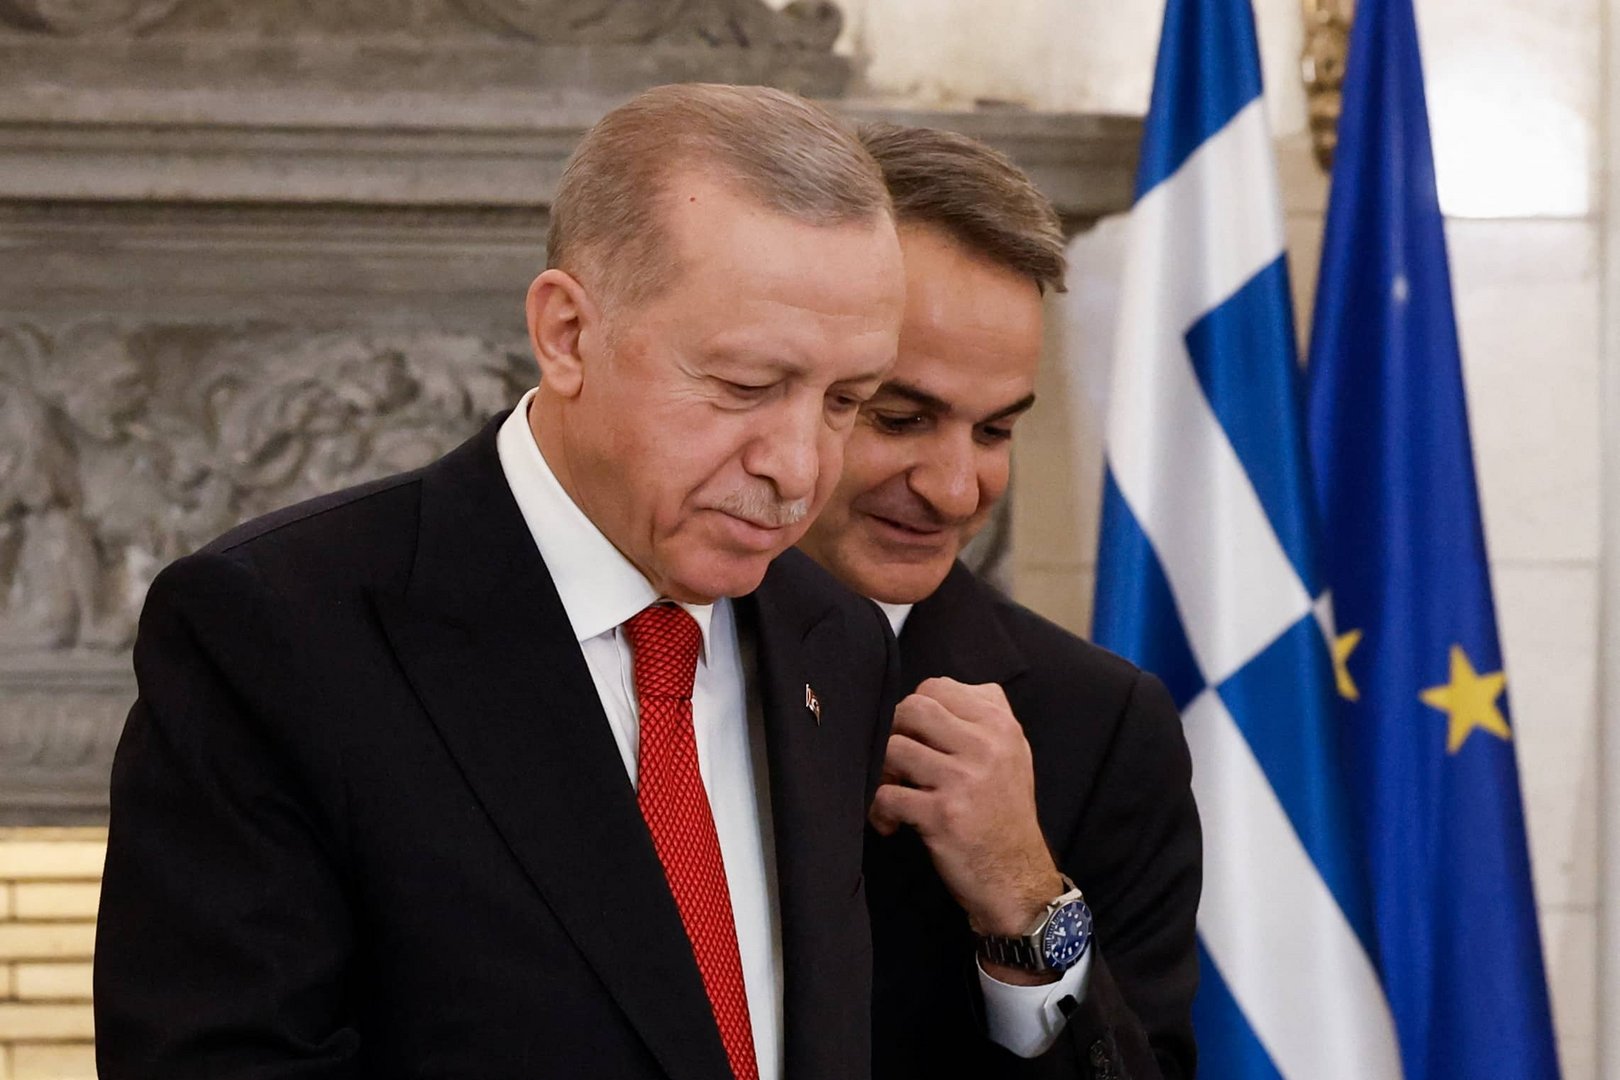 image Greece and Turkey parked the Cyprob, launch era of peace